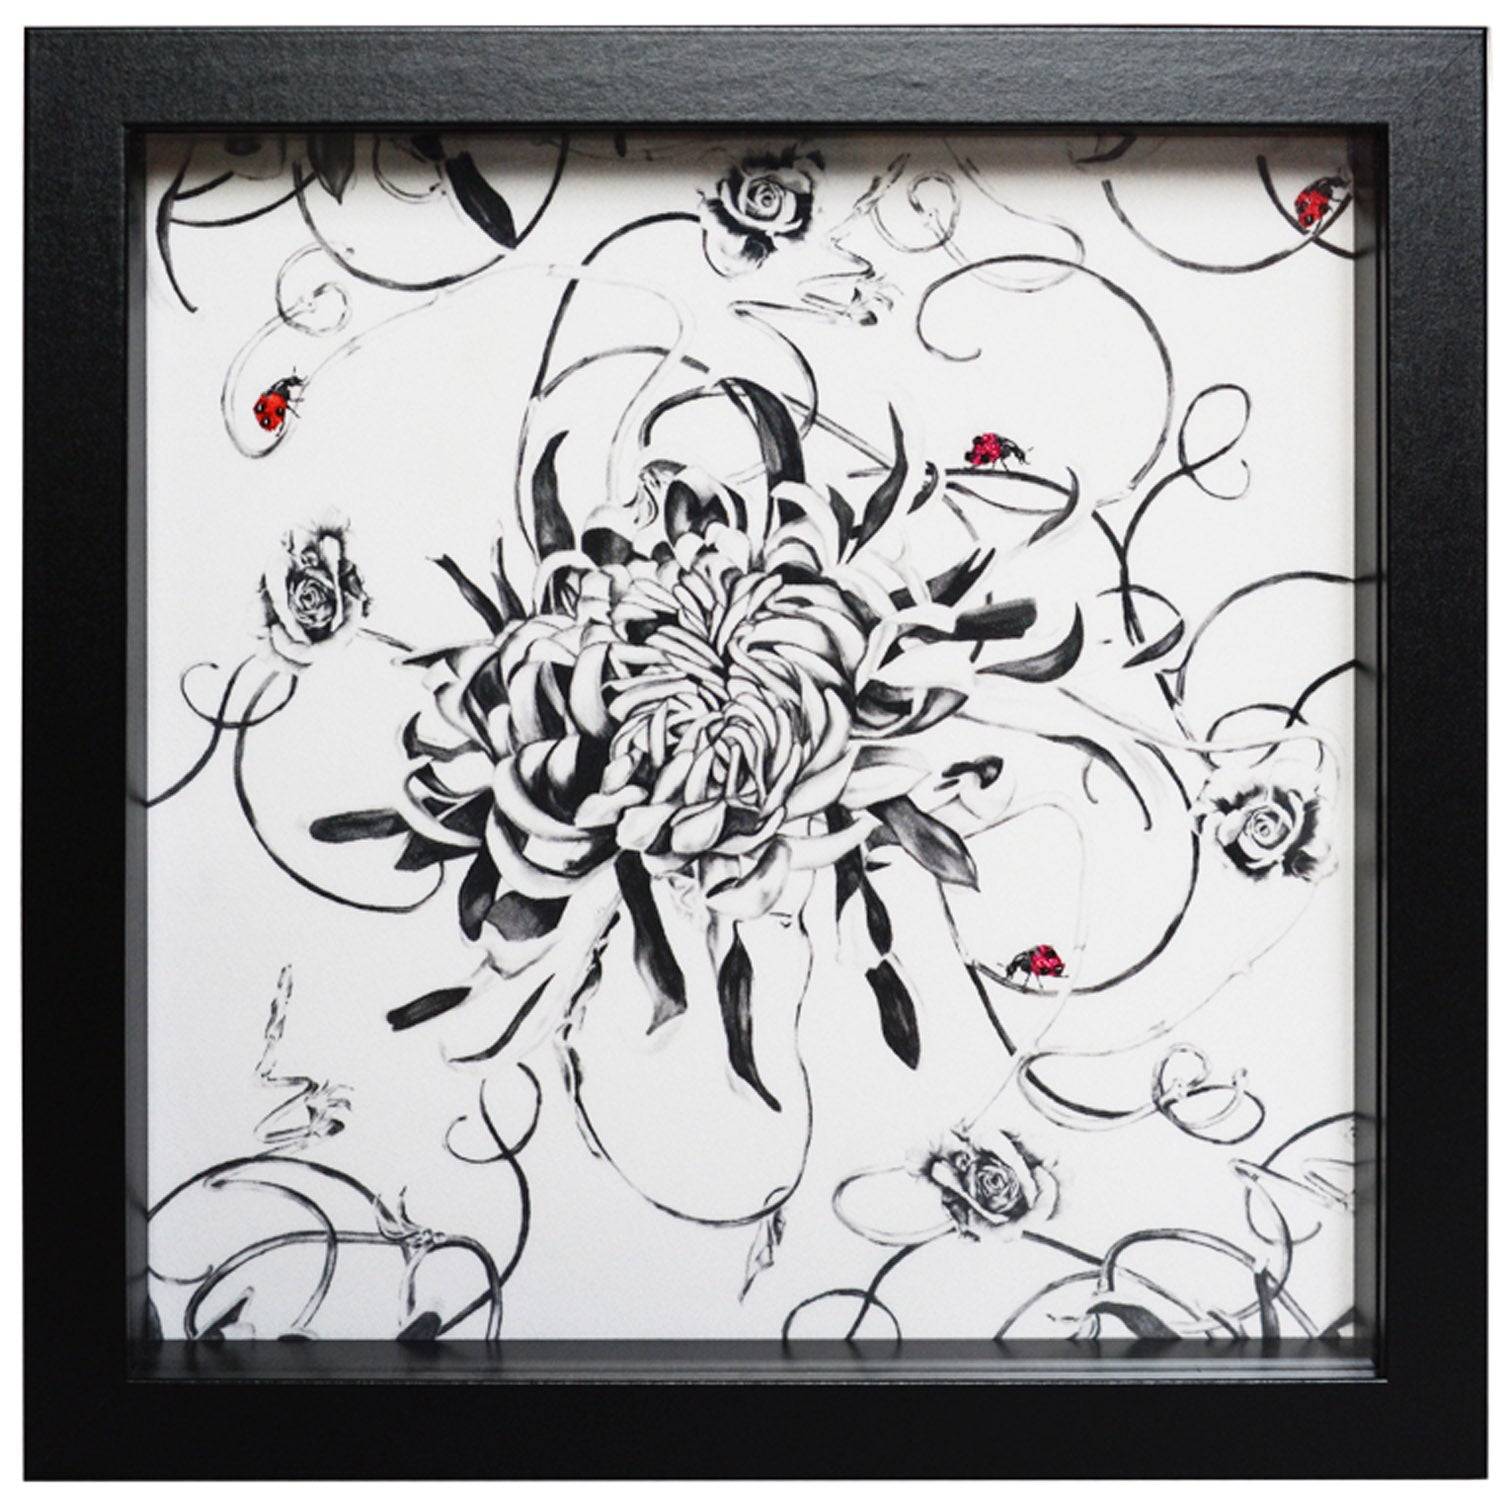 Monochrome floral design with hand embroidered ladybirds artwork